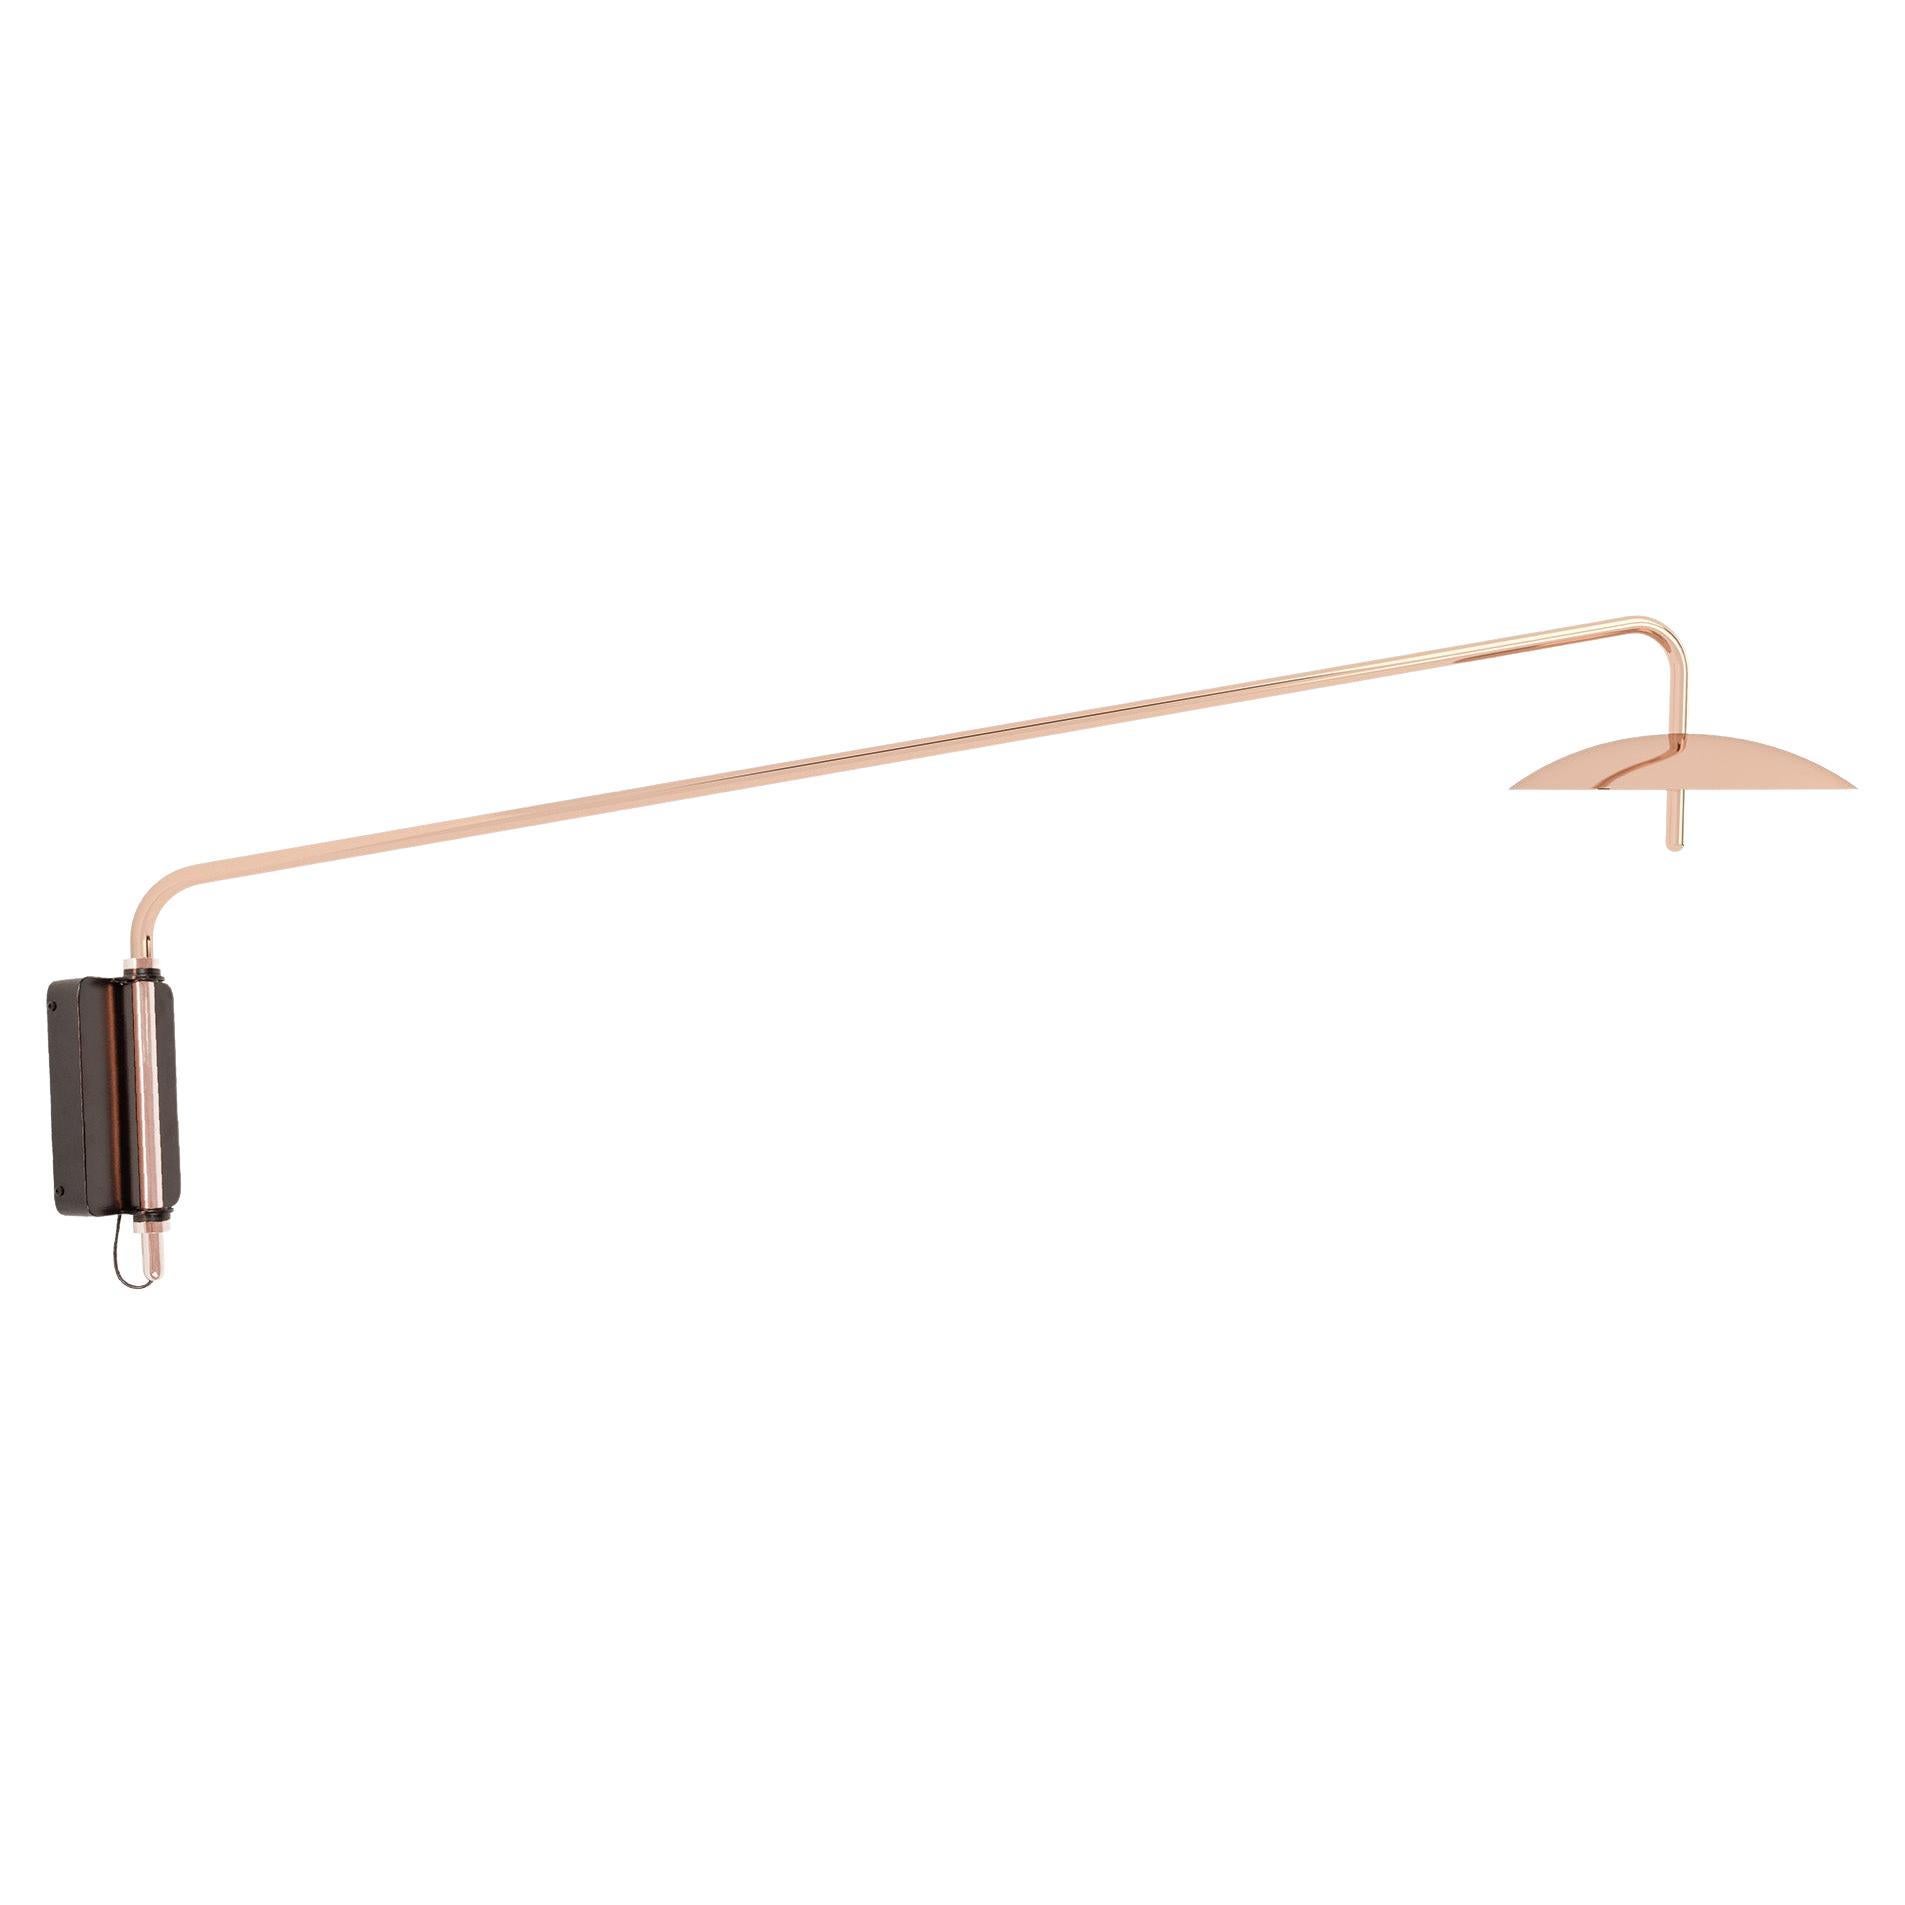 Signal Swing Arm Sconce in Copper, Long, Hardwire, from Souda, Made to Order For Sale